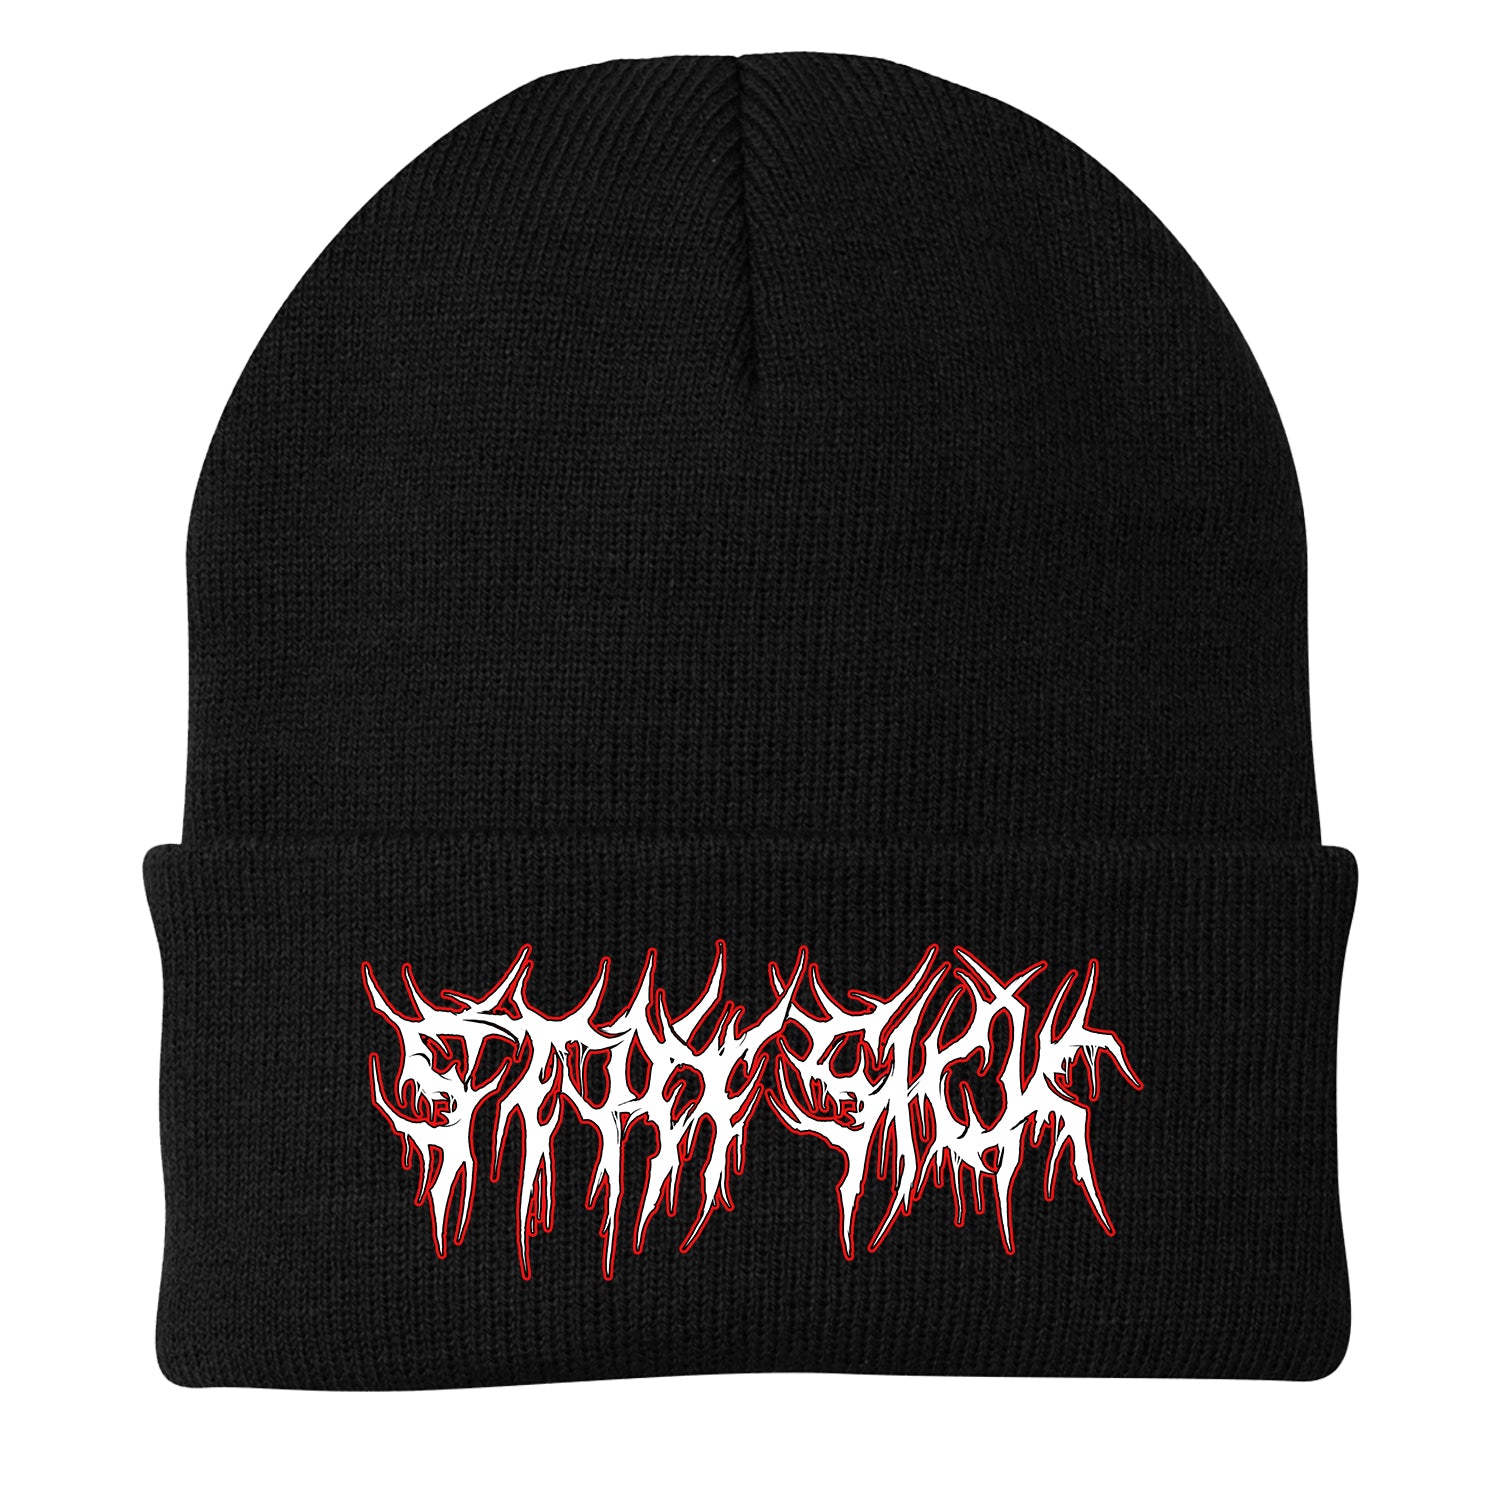 Black Cuffed Winter cap. Stay Sick Black Metal Logo embroidered on the front in white.